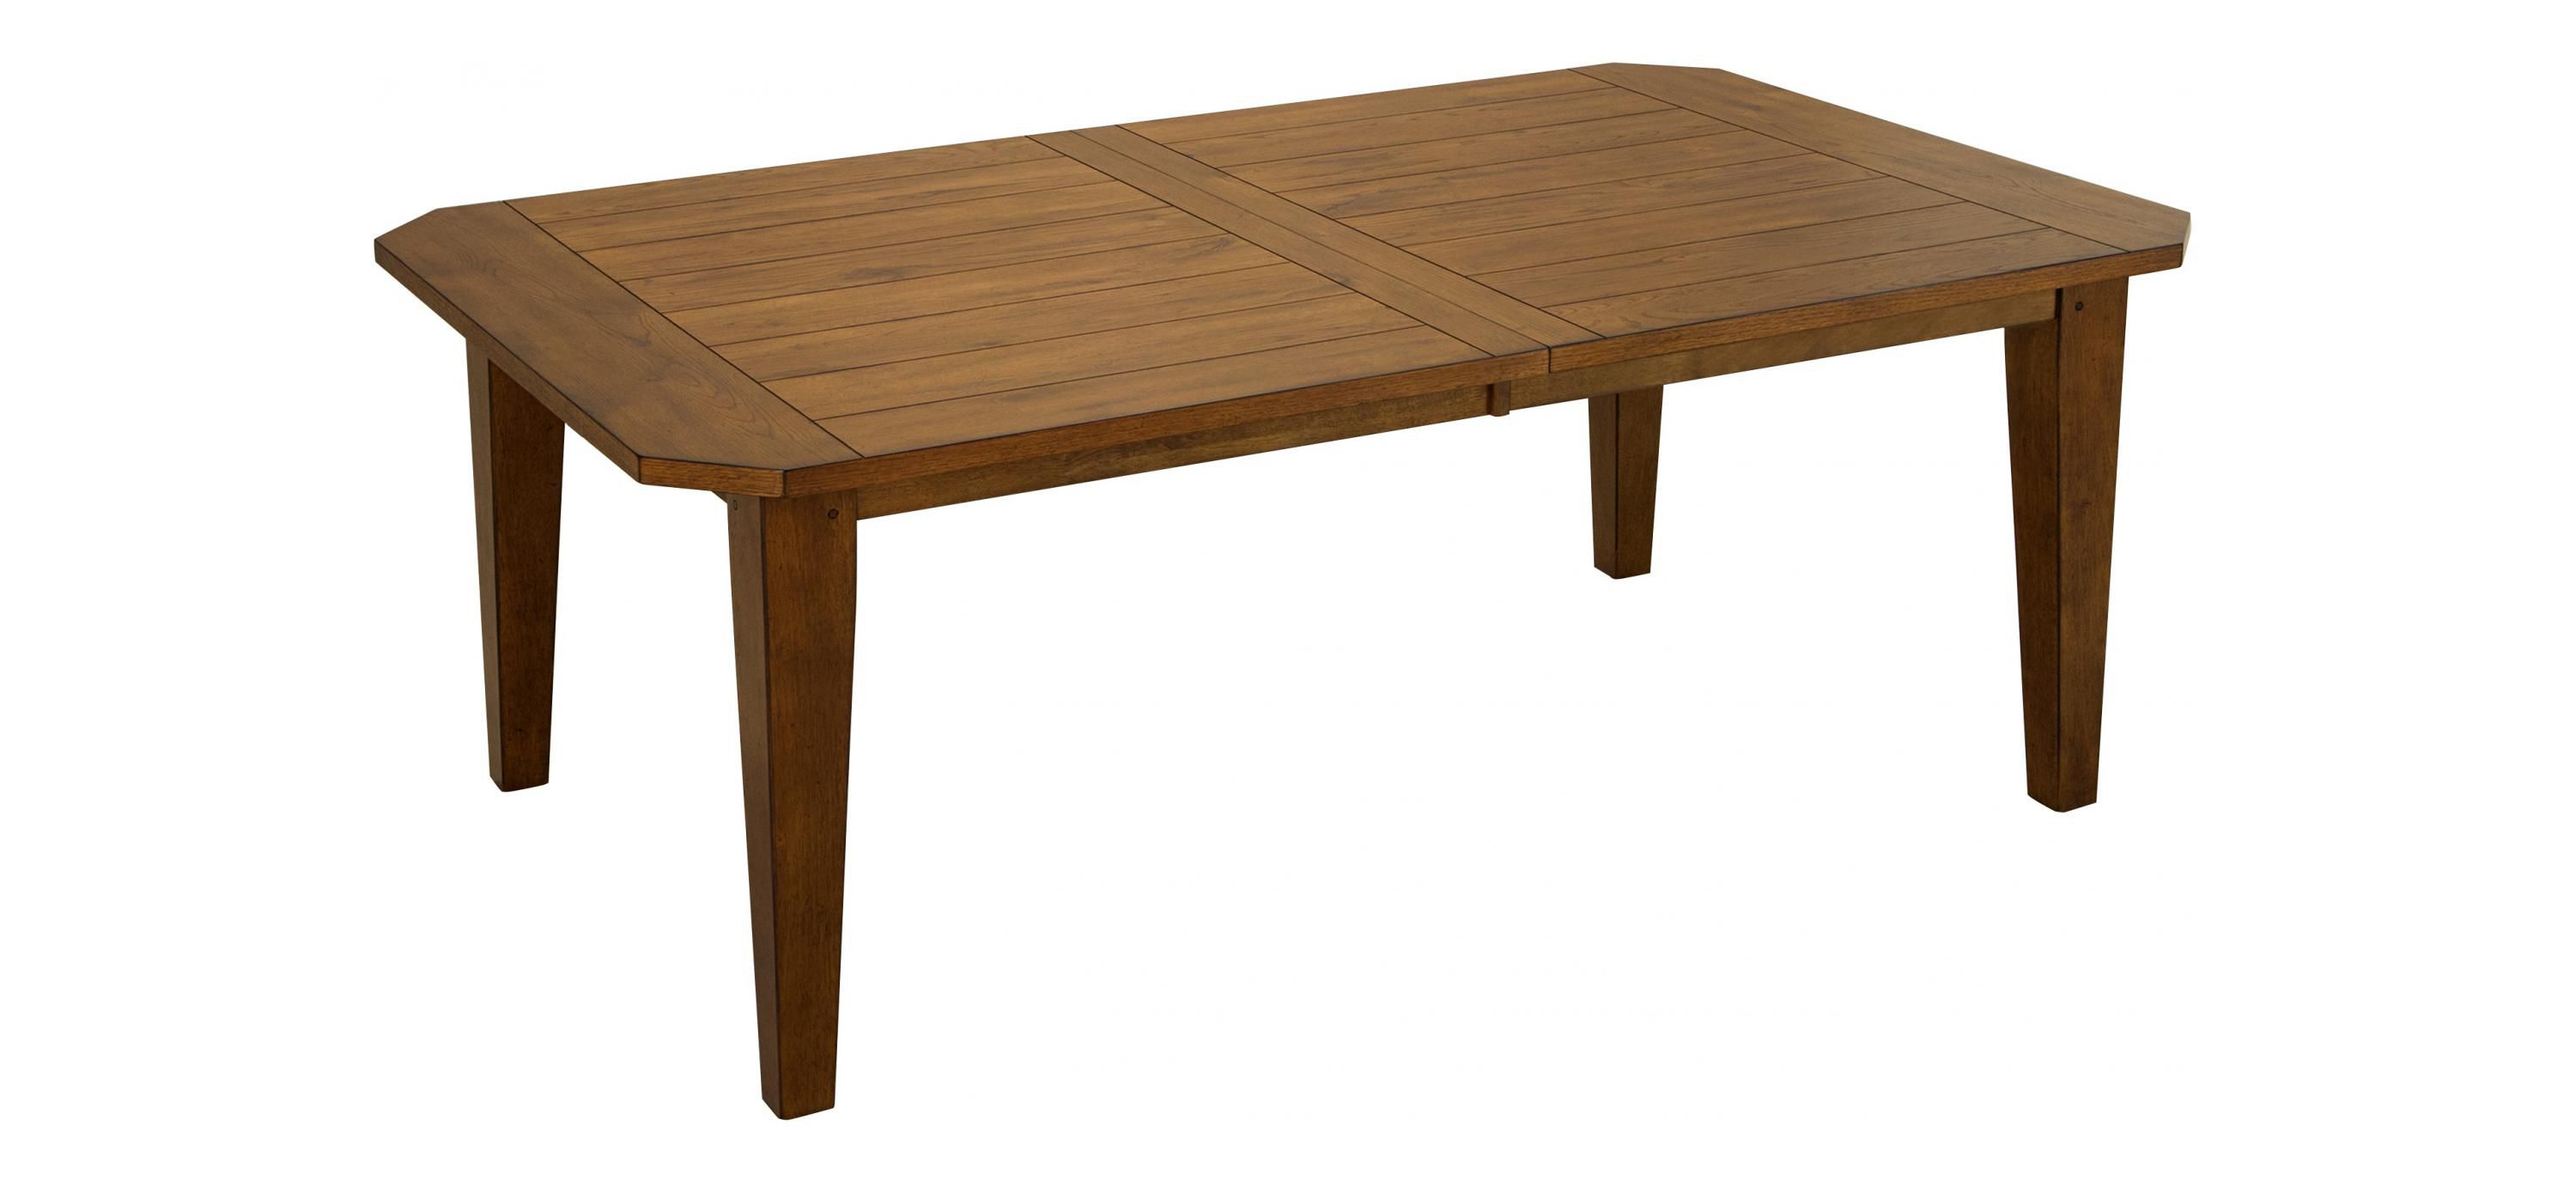 Colebrook Dining Table w/ Leaves